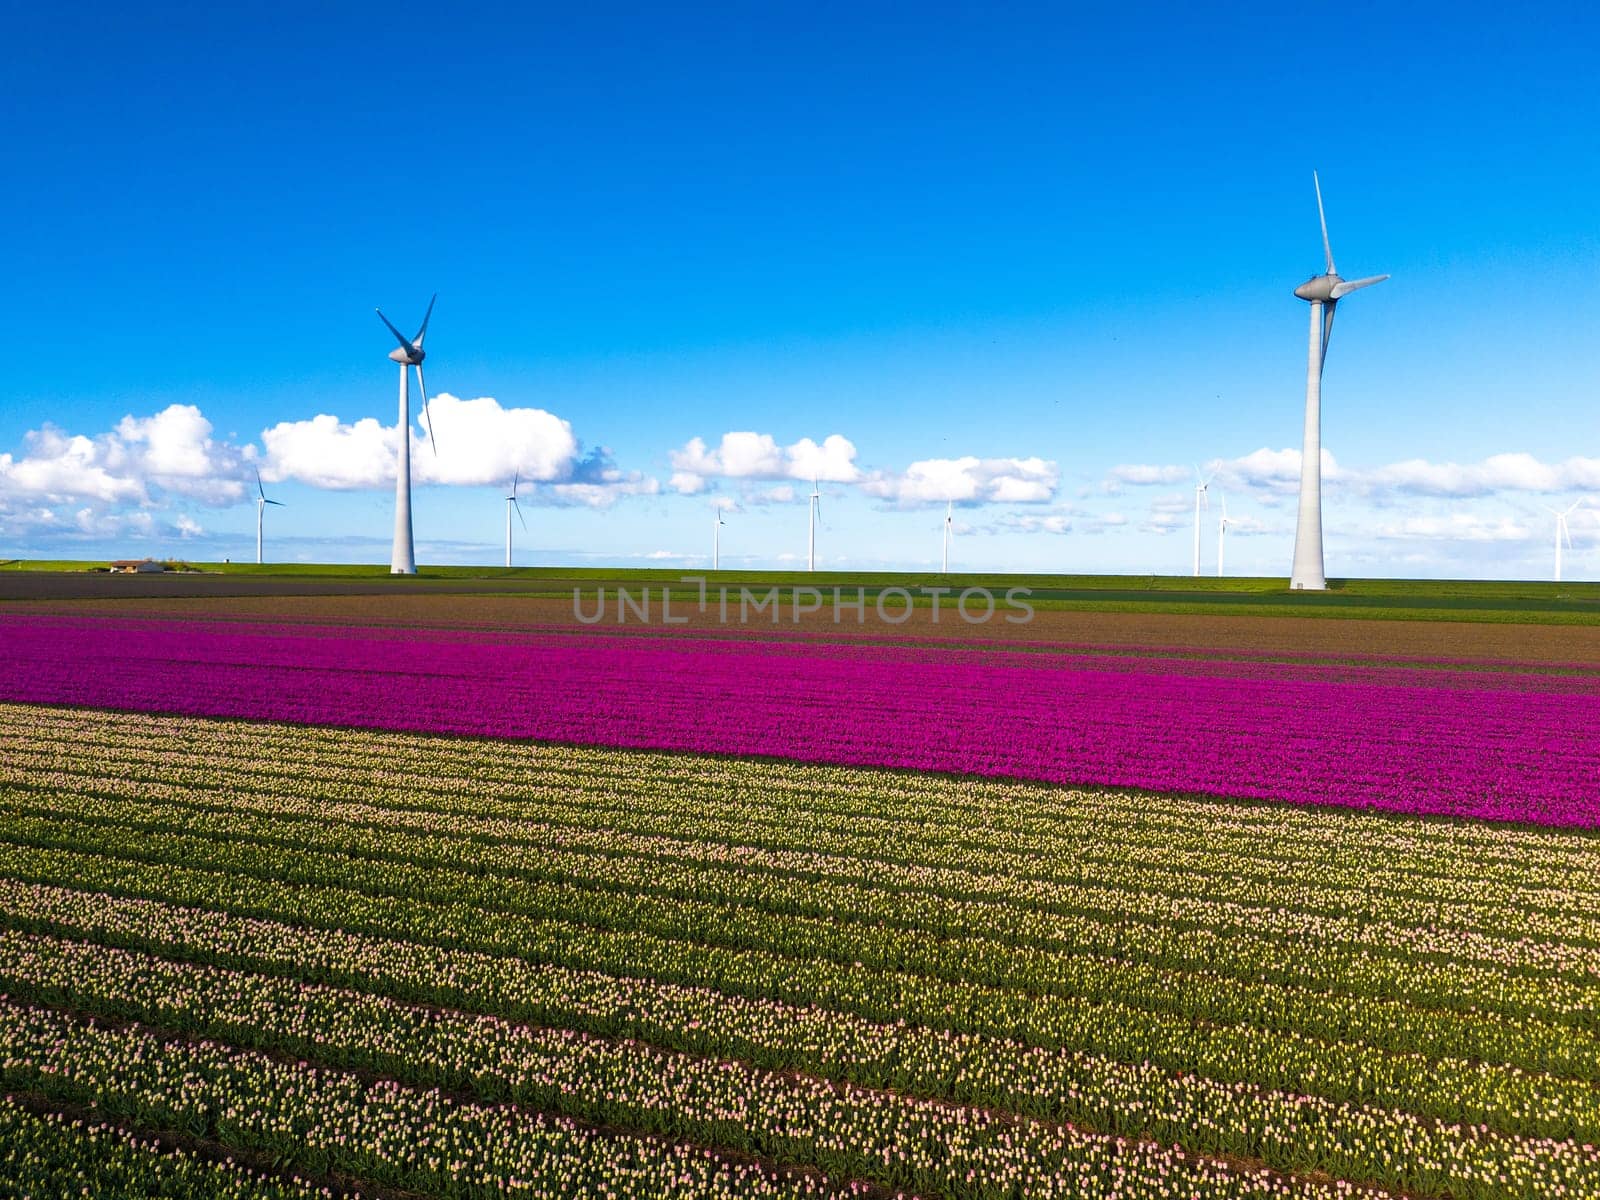 A picturesque scene of a vast field adorned with colorful flowers, with majestic windmills spinning in the distance, set against a clear blue sky in the Noordoostpolder Netherlands